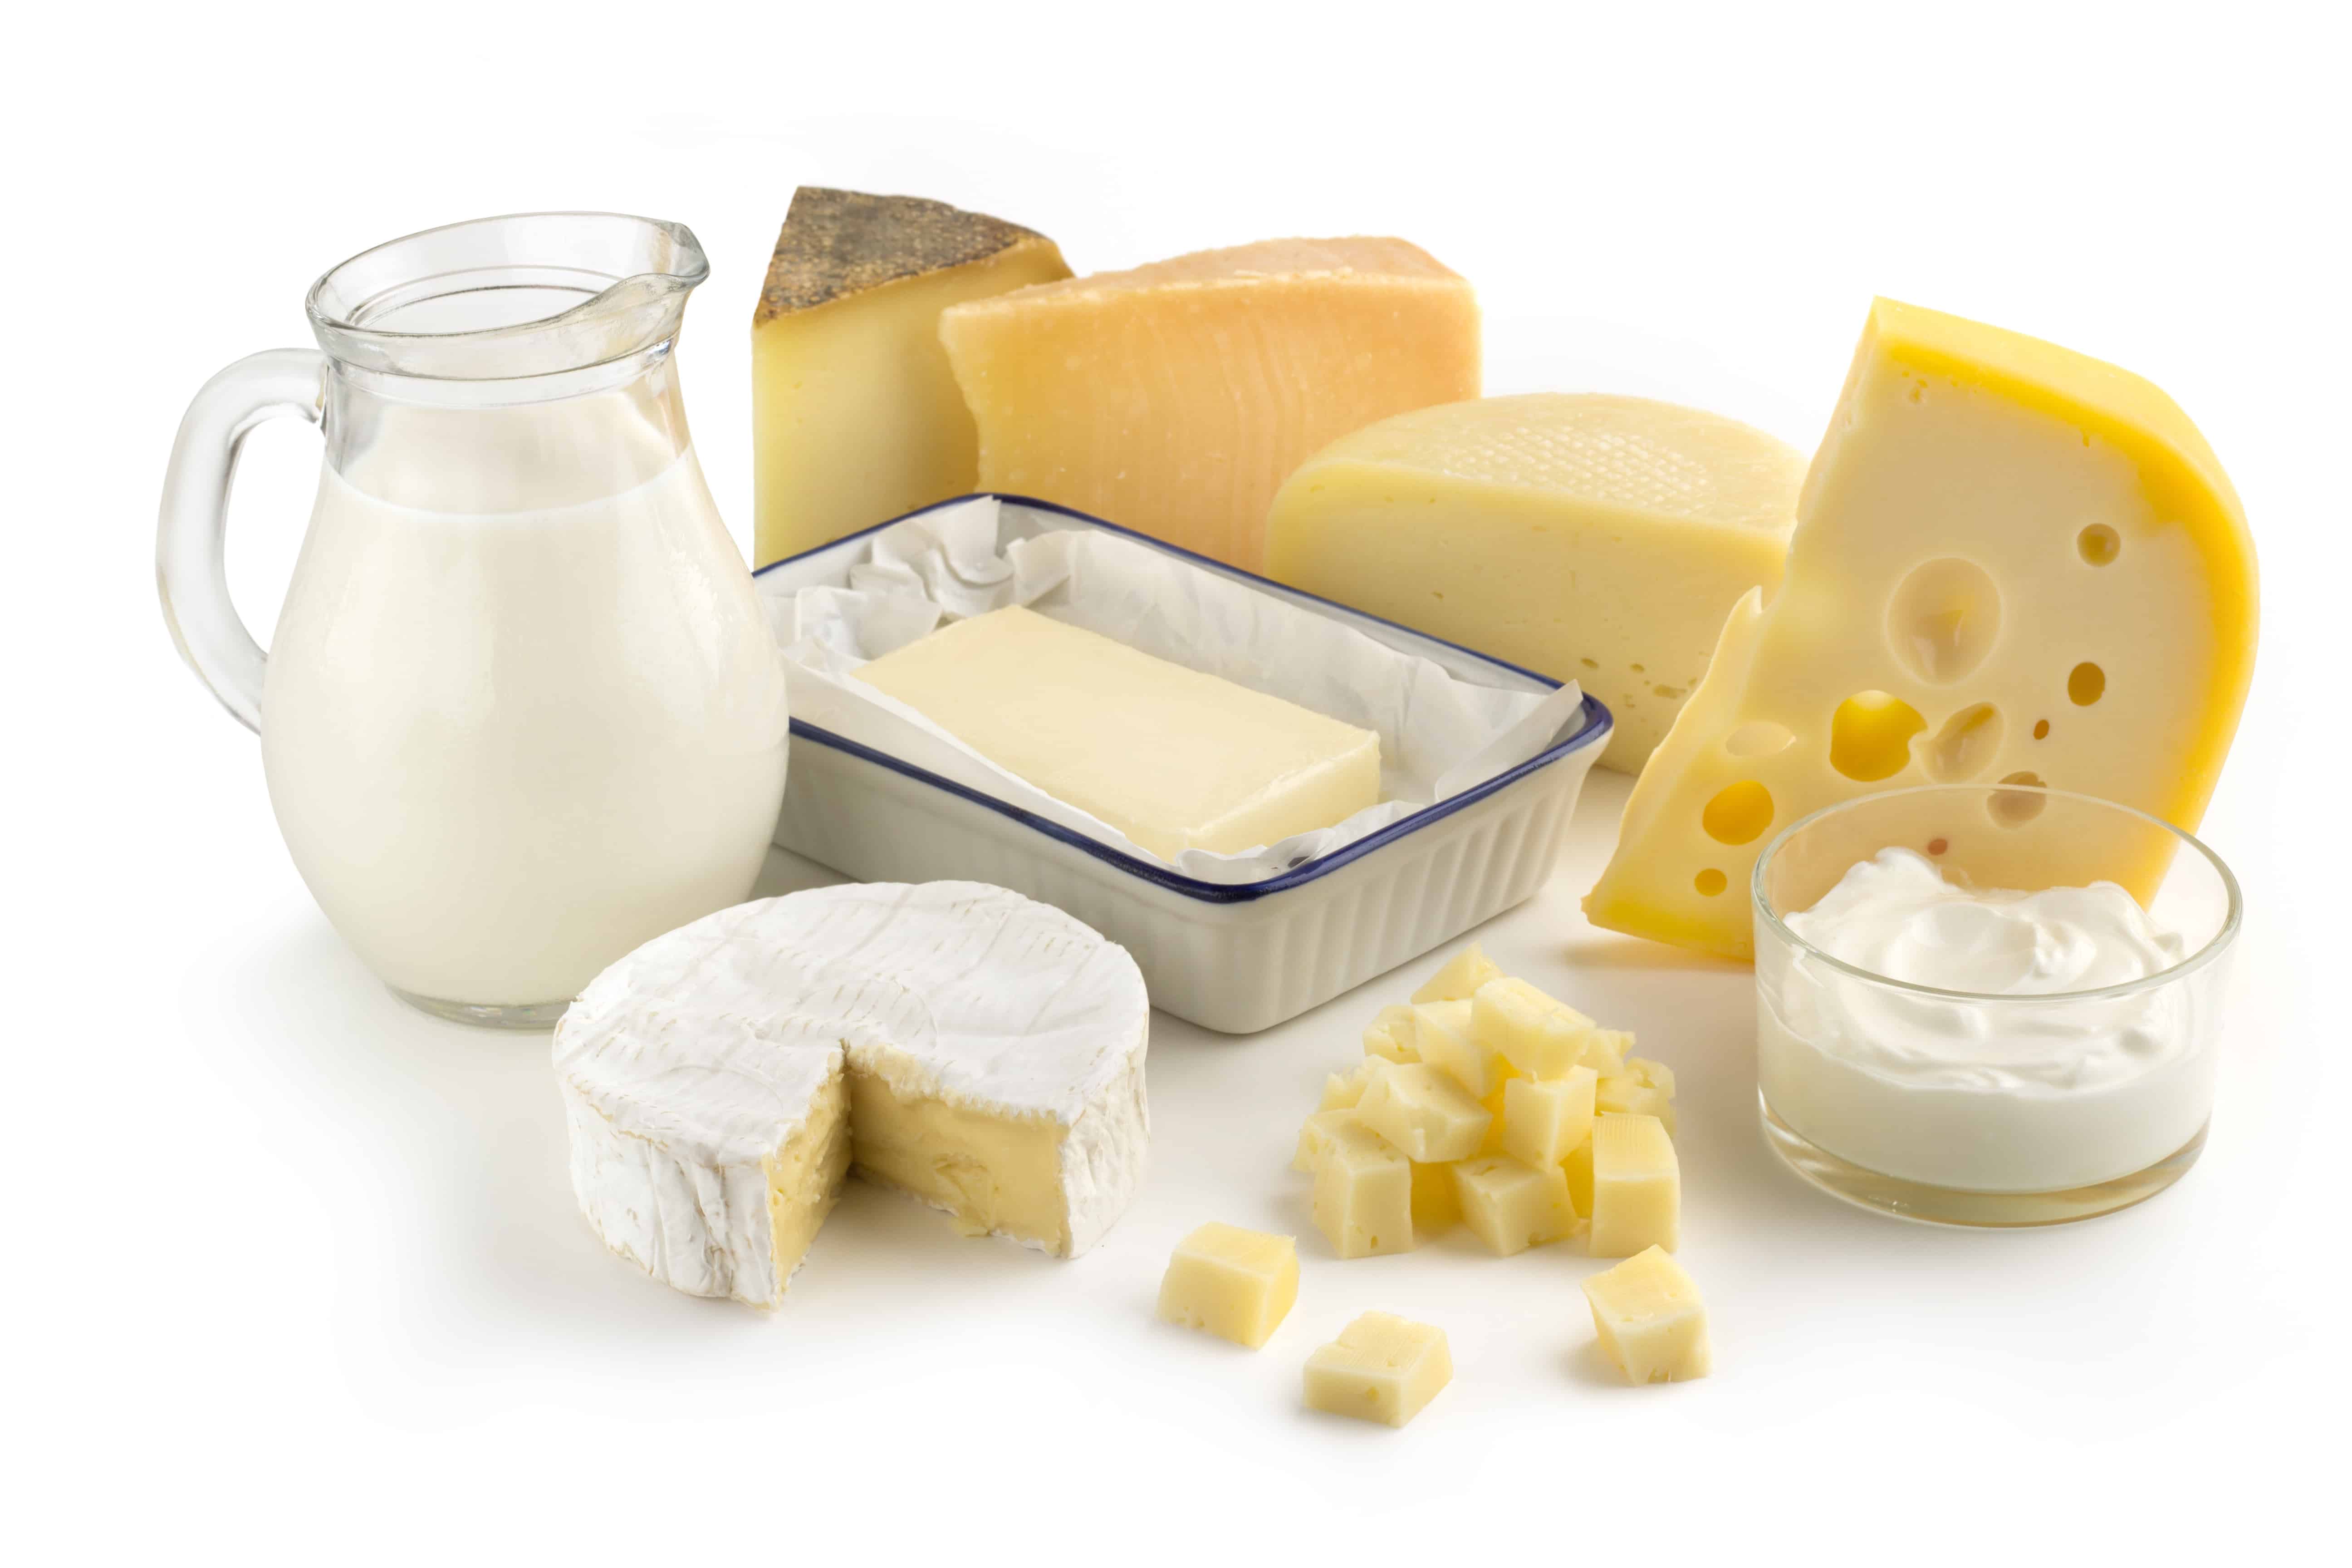 Controlling the rheological behaviour of dairy food items to create consistent products – cheese, cream, ice-cream, milk, butter, yogurt